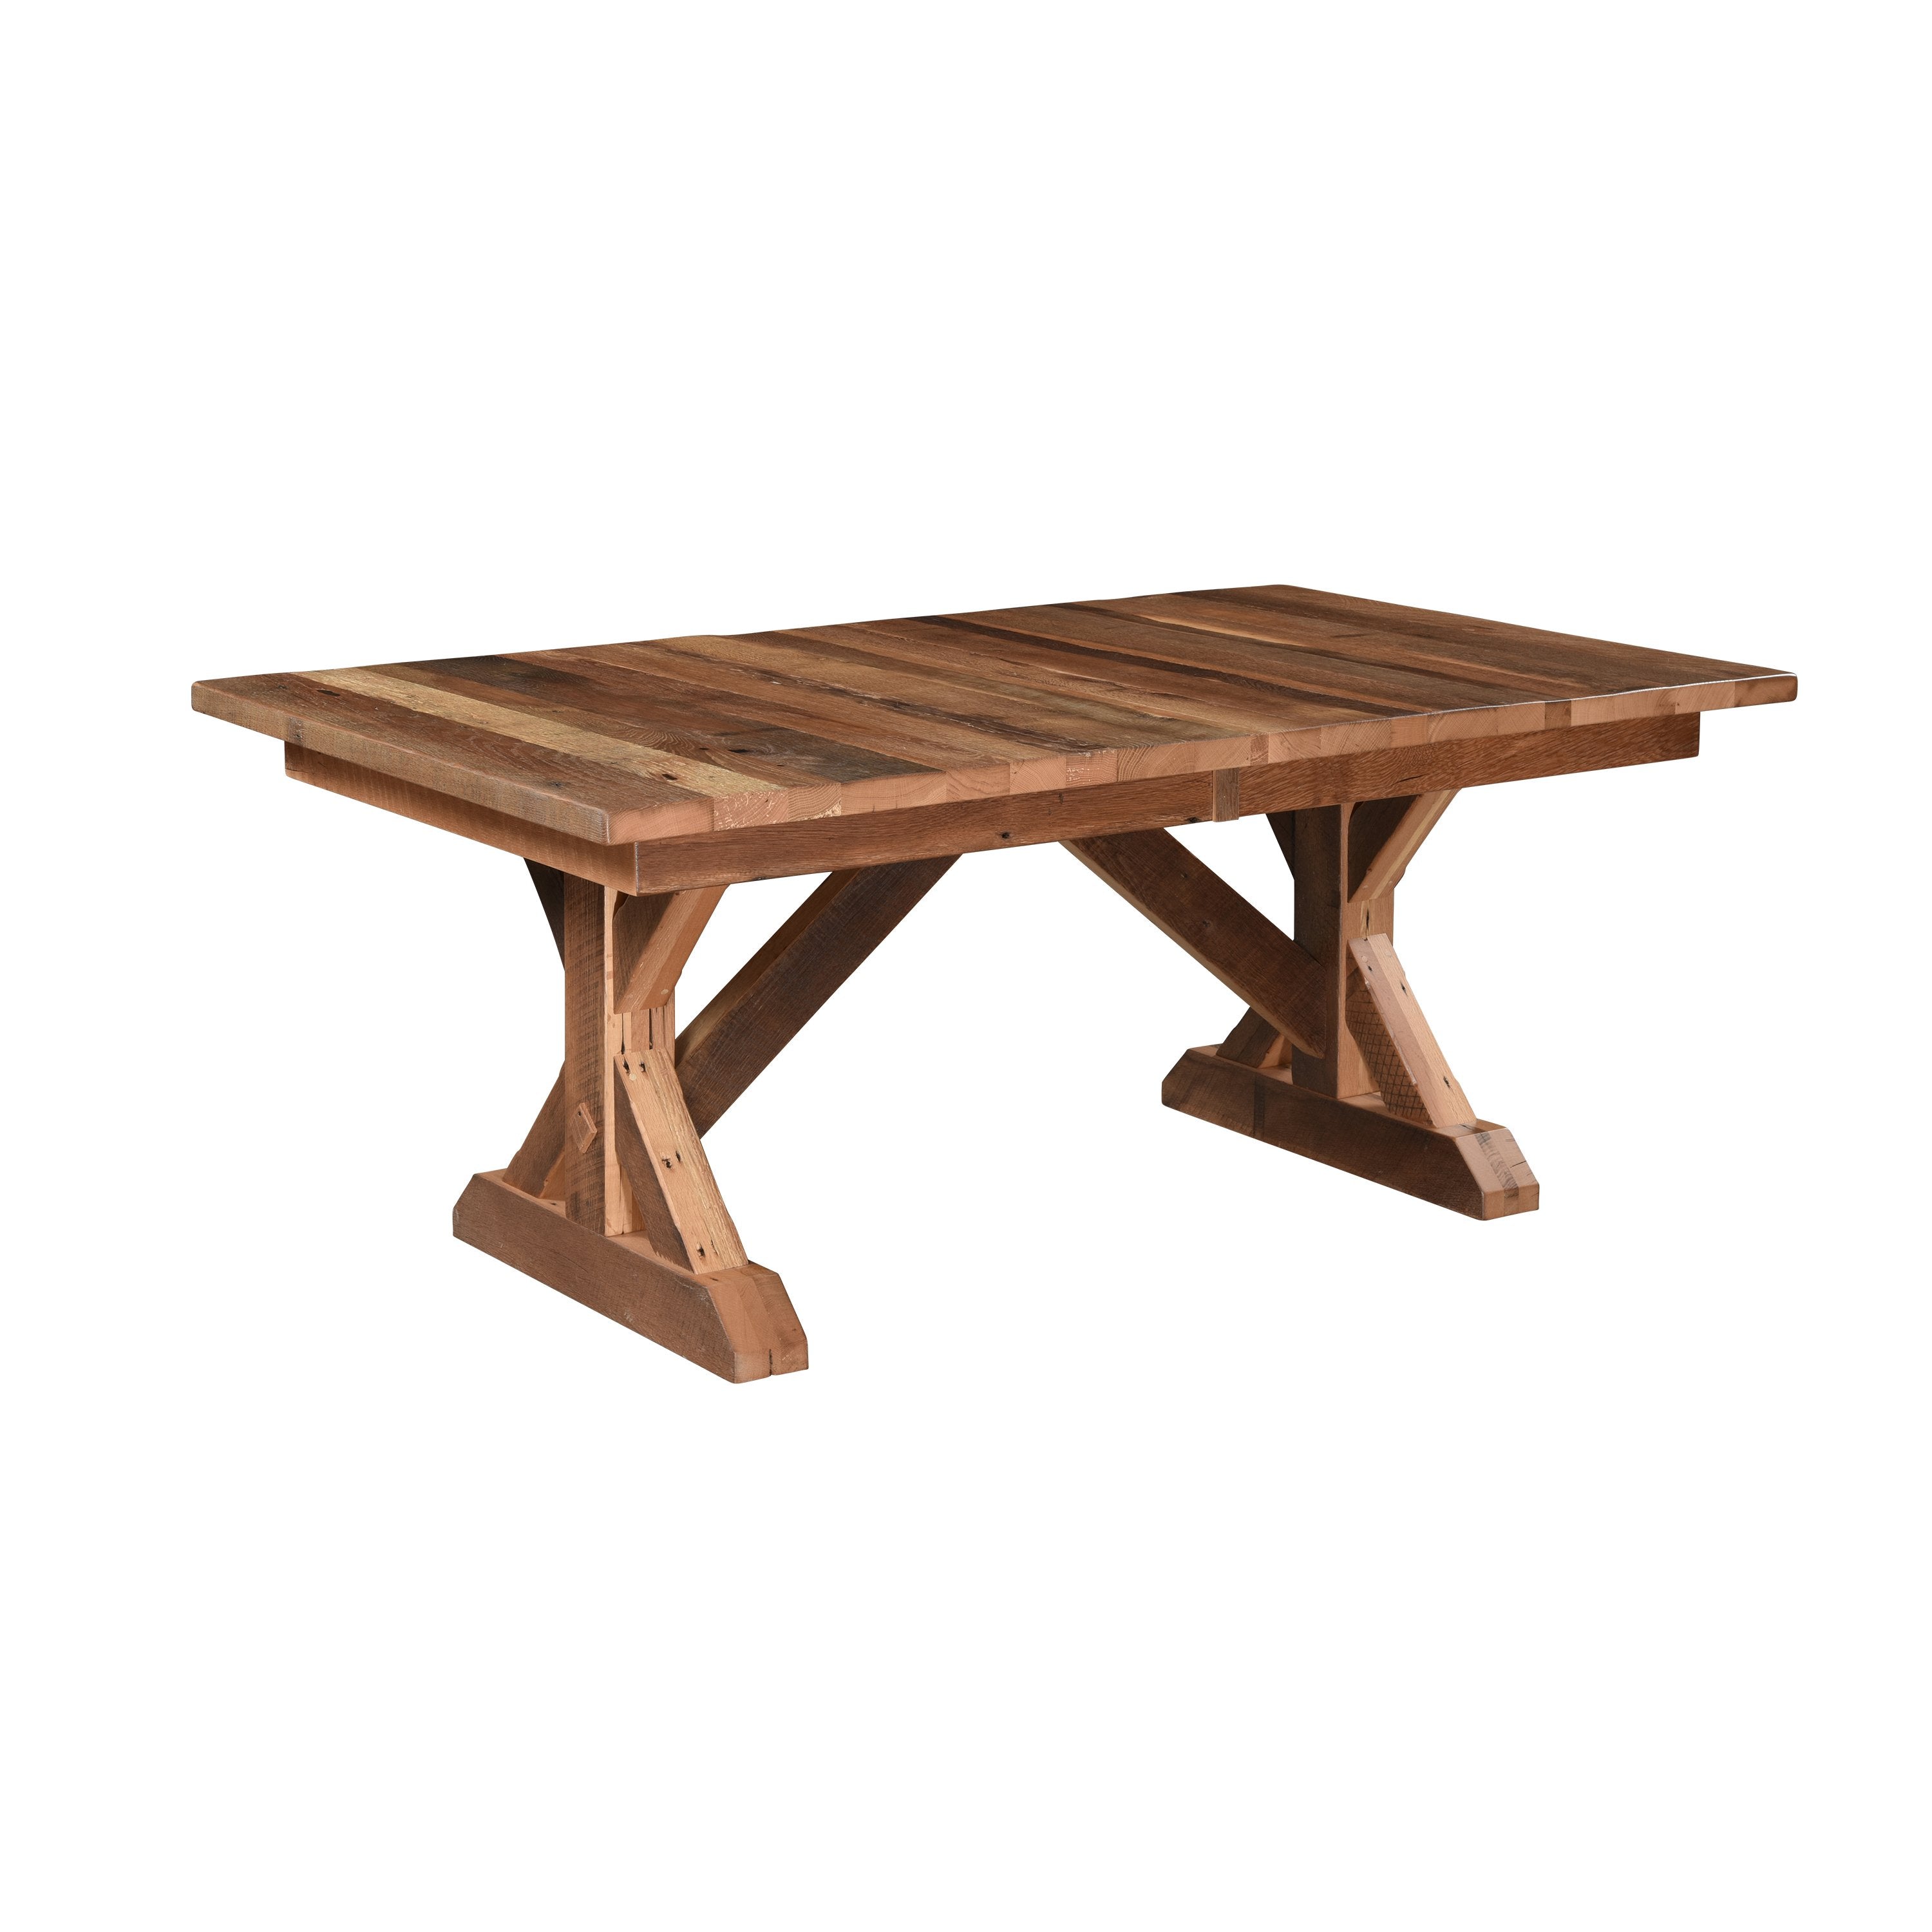 Stratford Rustic Dining Table with leaf option